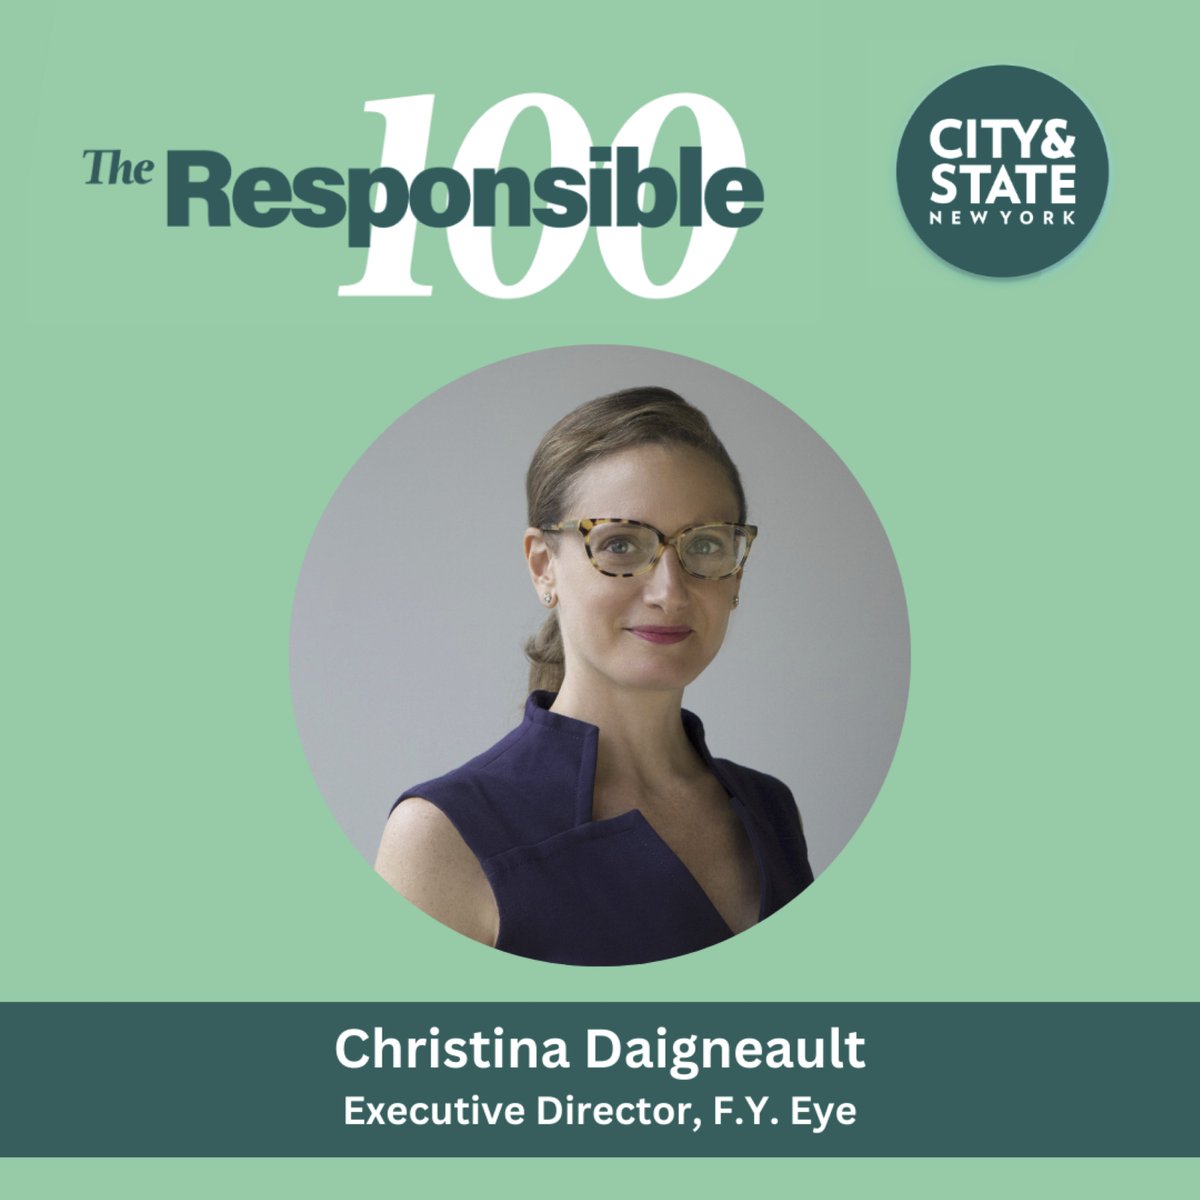 We are excited to announce that our Executive Director, Christina Daigneault, has been named in @cityandstateny’s #Responsible100 list, honoring leaders fostering positive change and social responsibility in NYC! bit.ly/41kPd7H